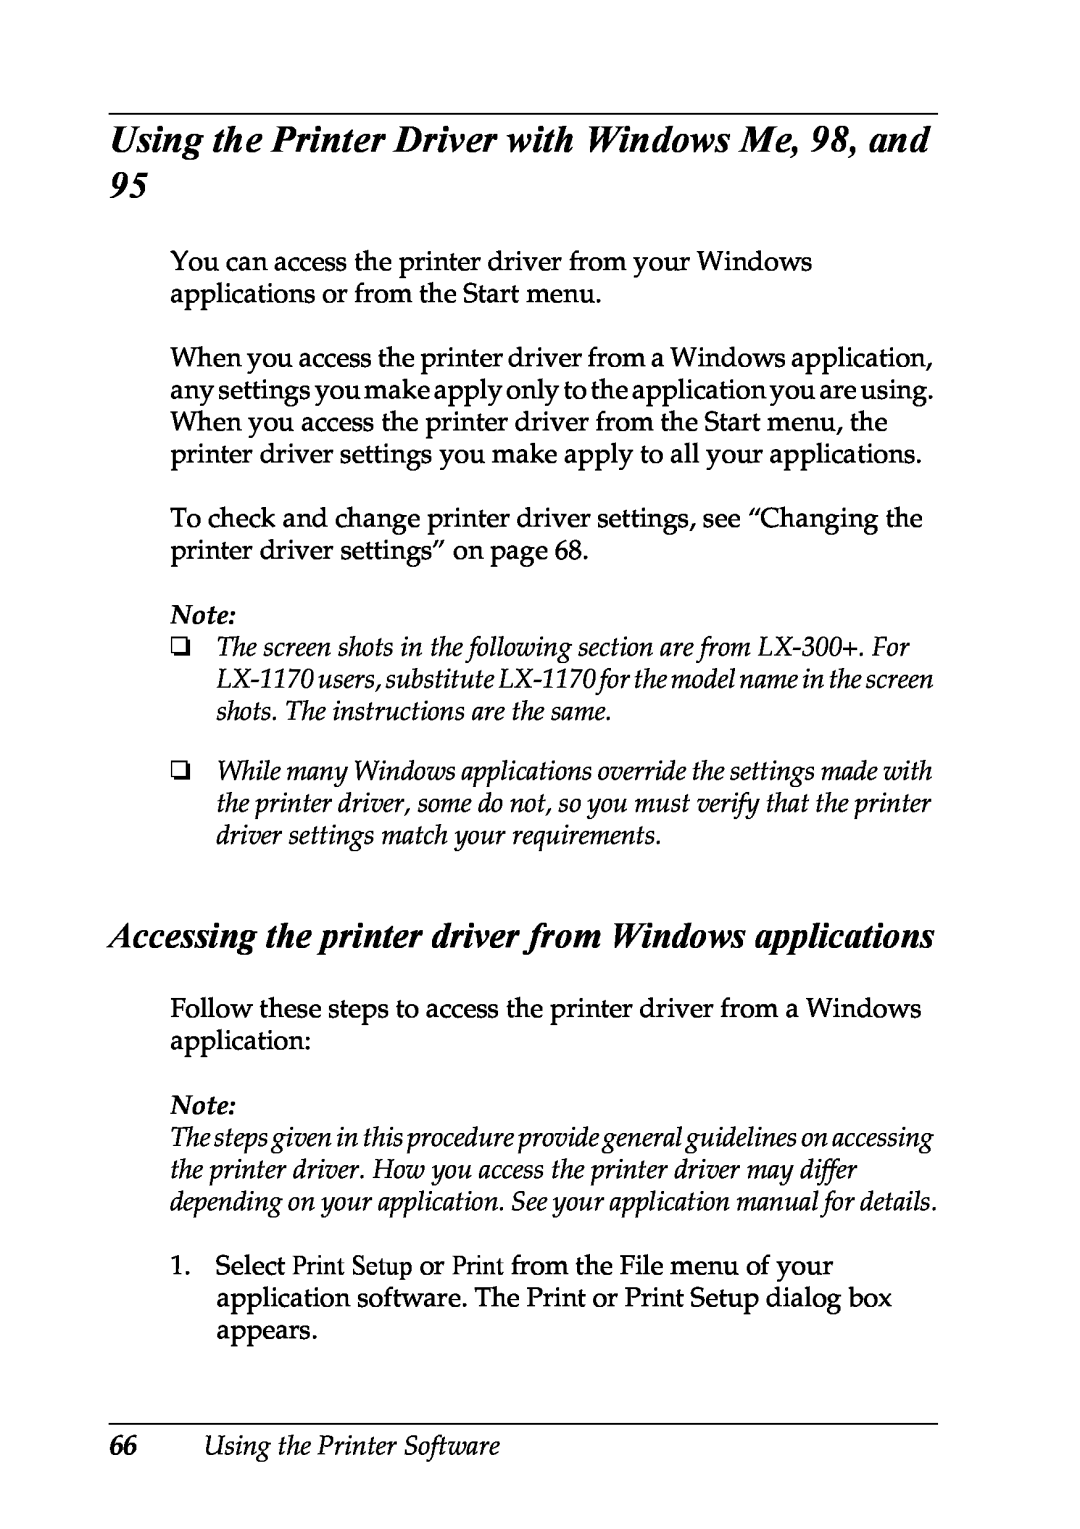 Epson LX-1170 Using the Printer Driver with Windows Me, 98, and, Accessing the printer driver from Windows applications 